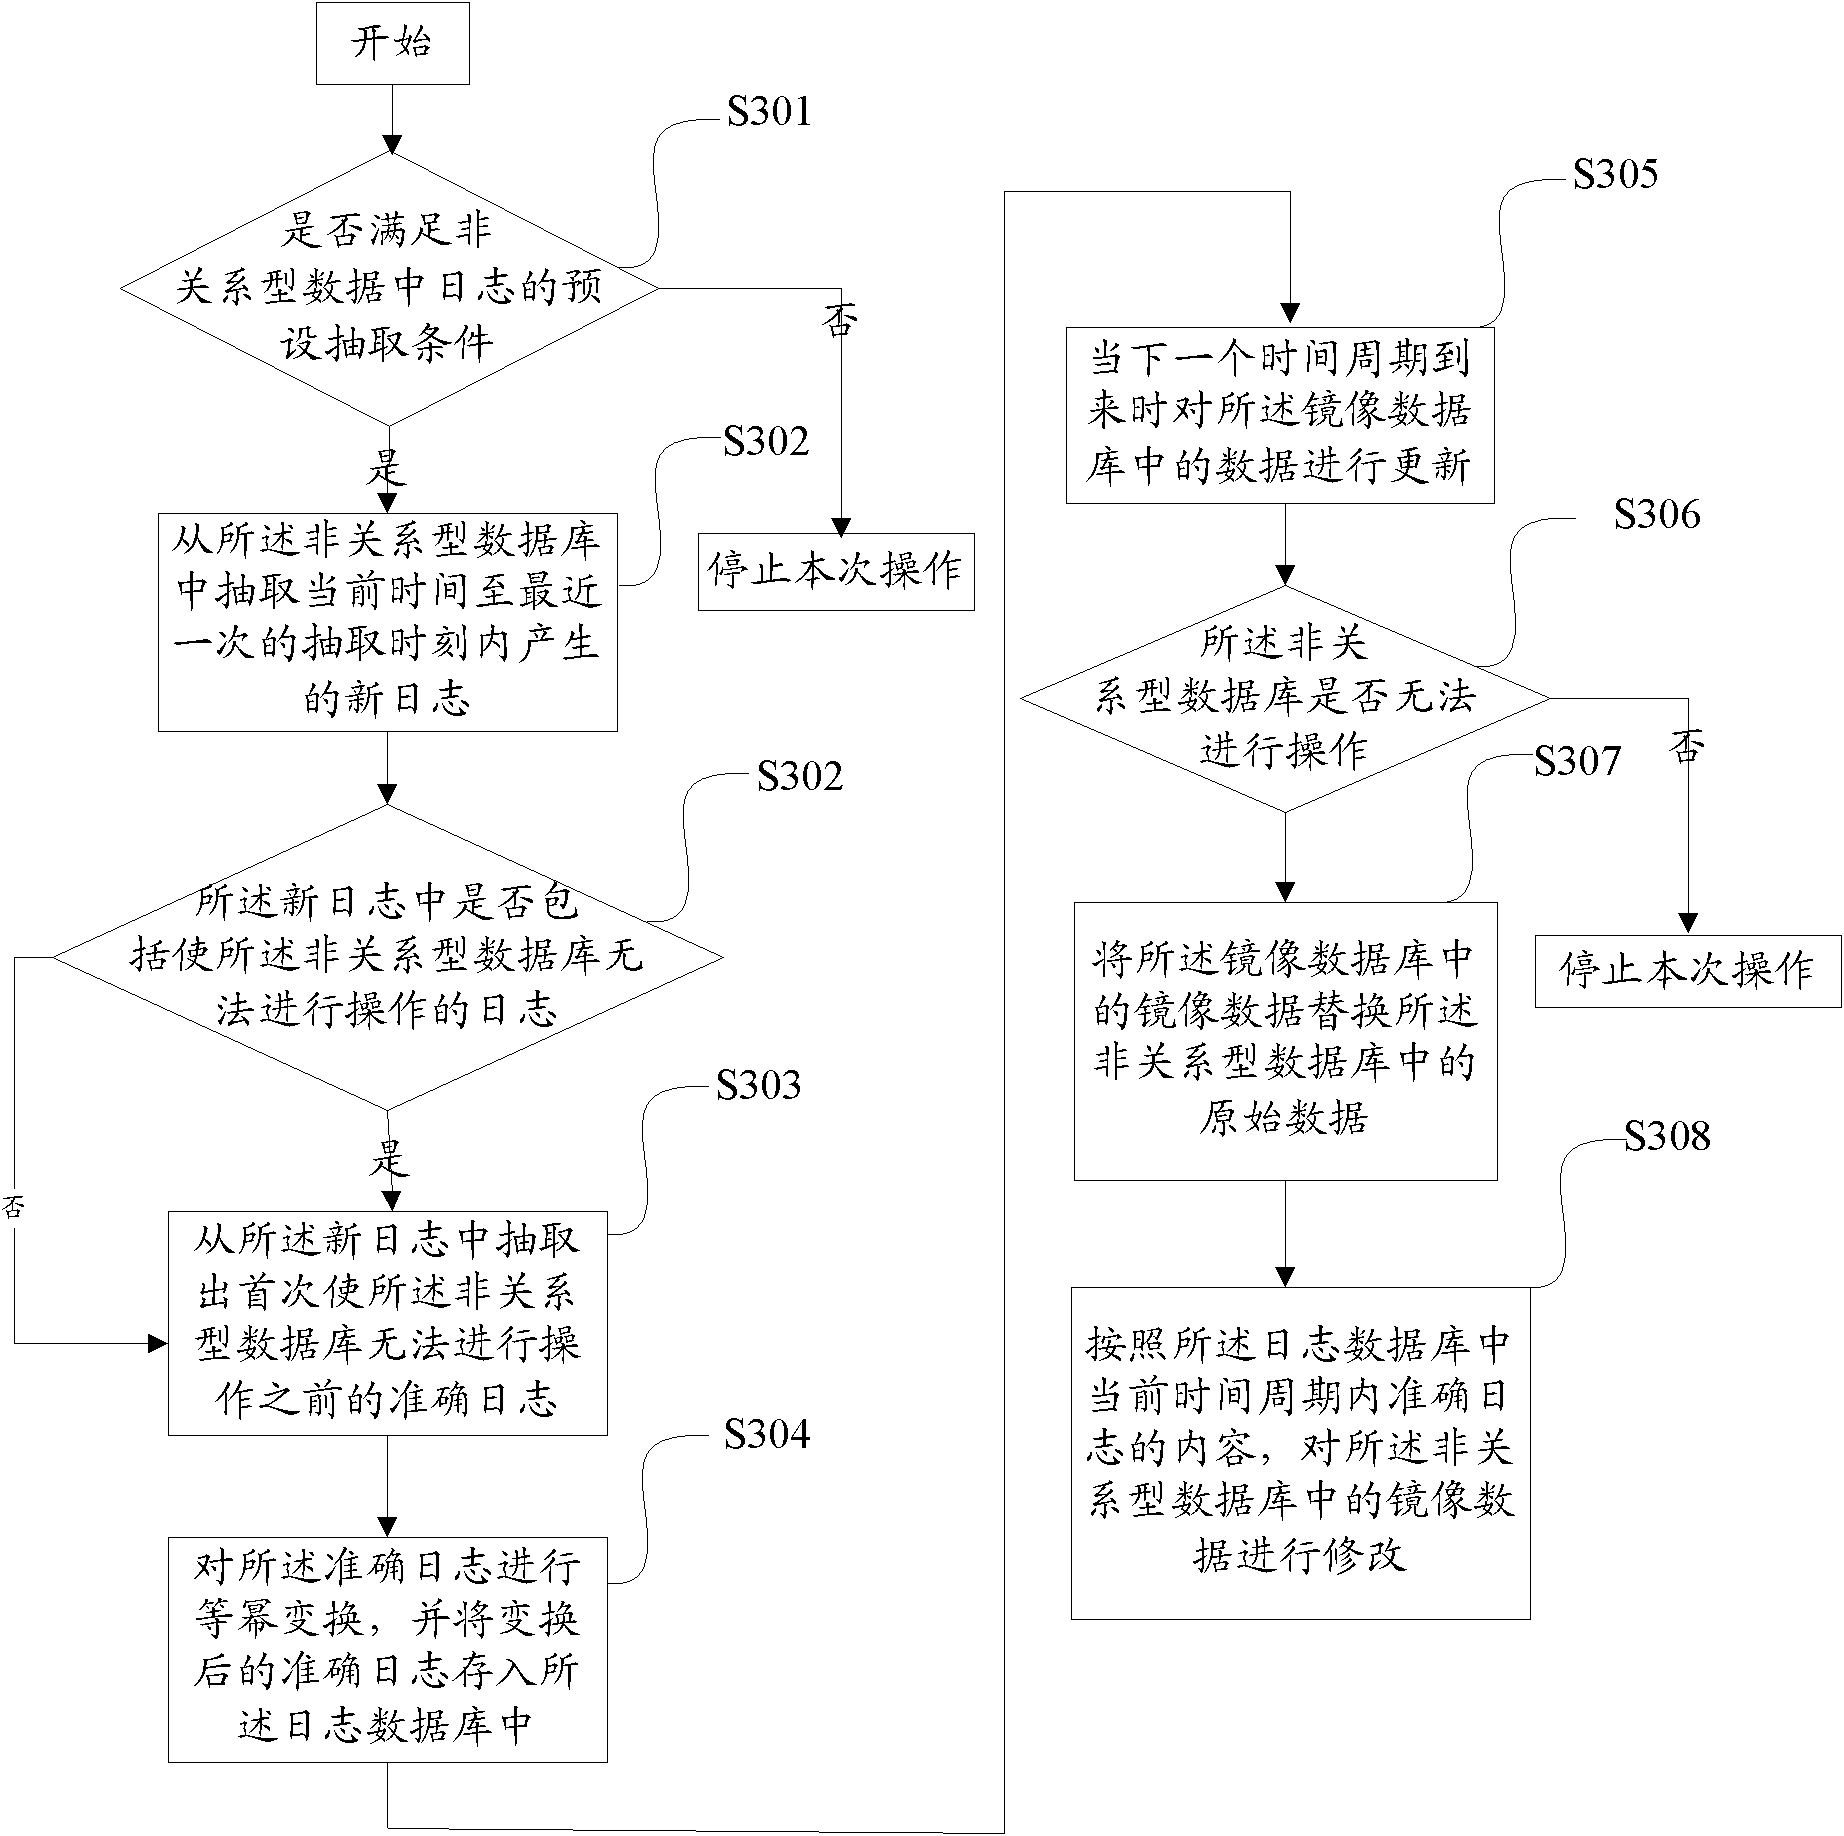 Roll-back method, device and system of non relational database